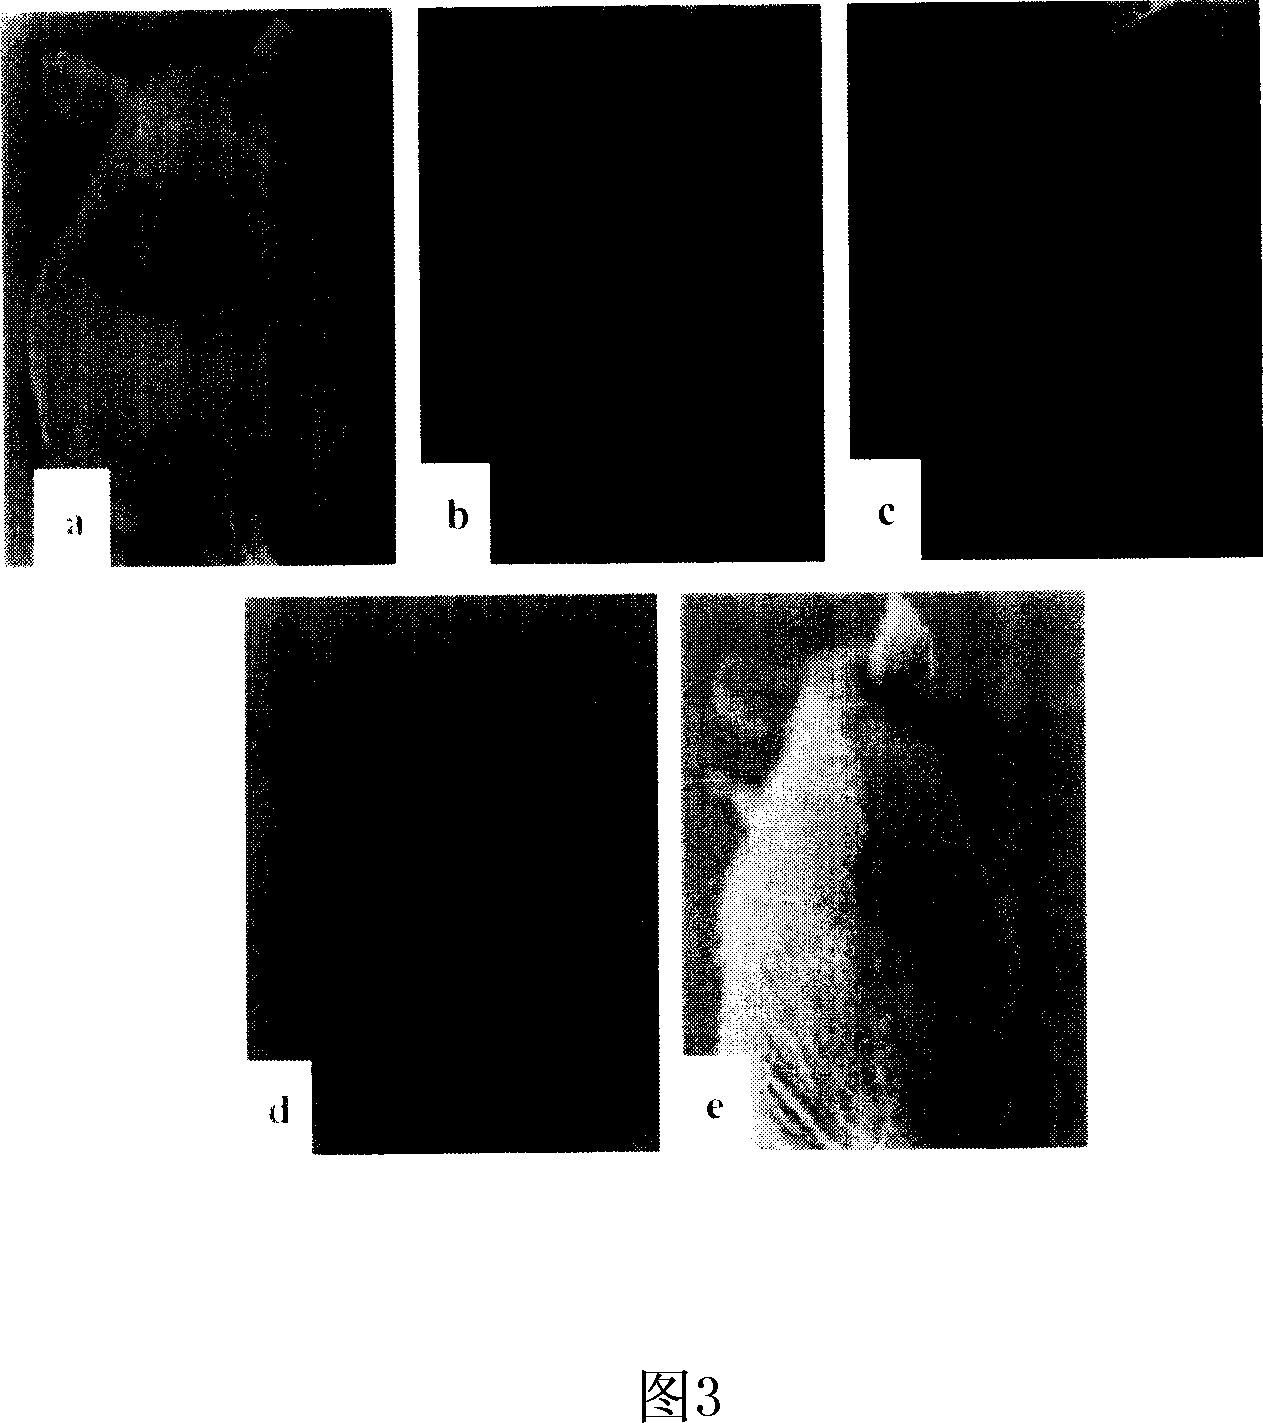 Construction method and application for complexion adjustable organization engineering skin